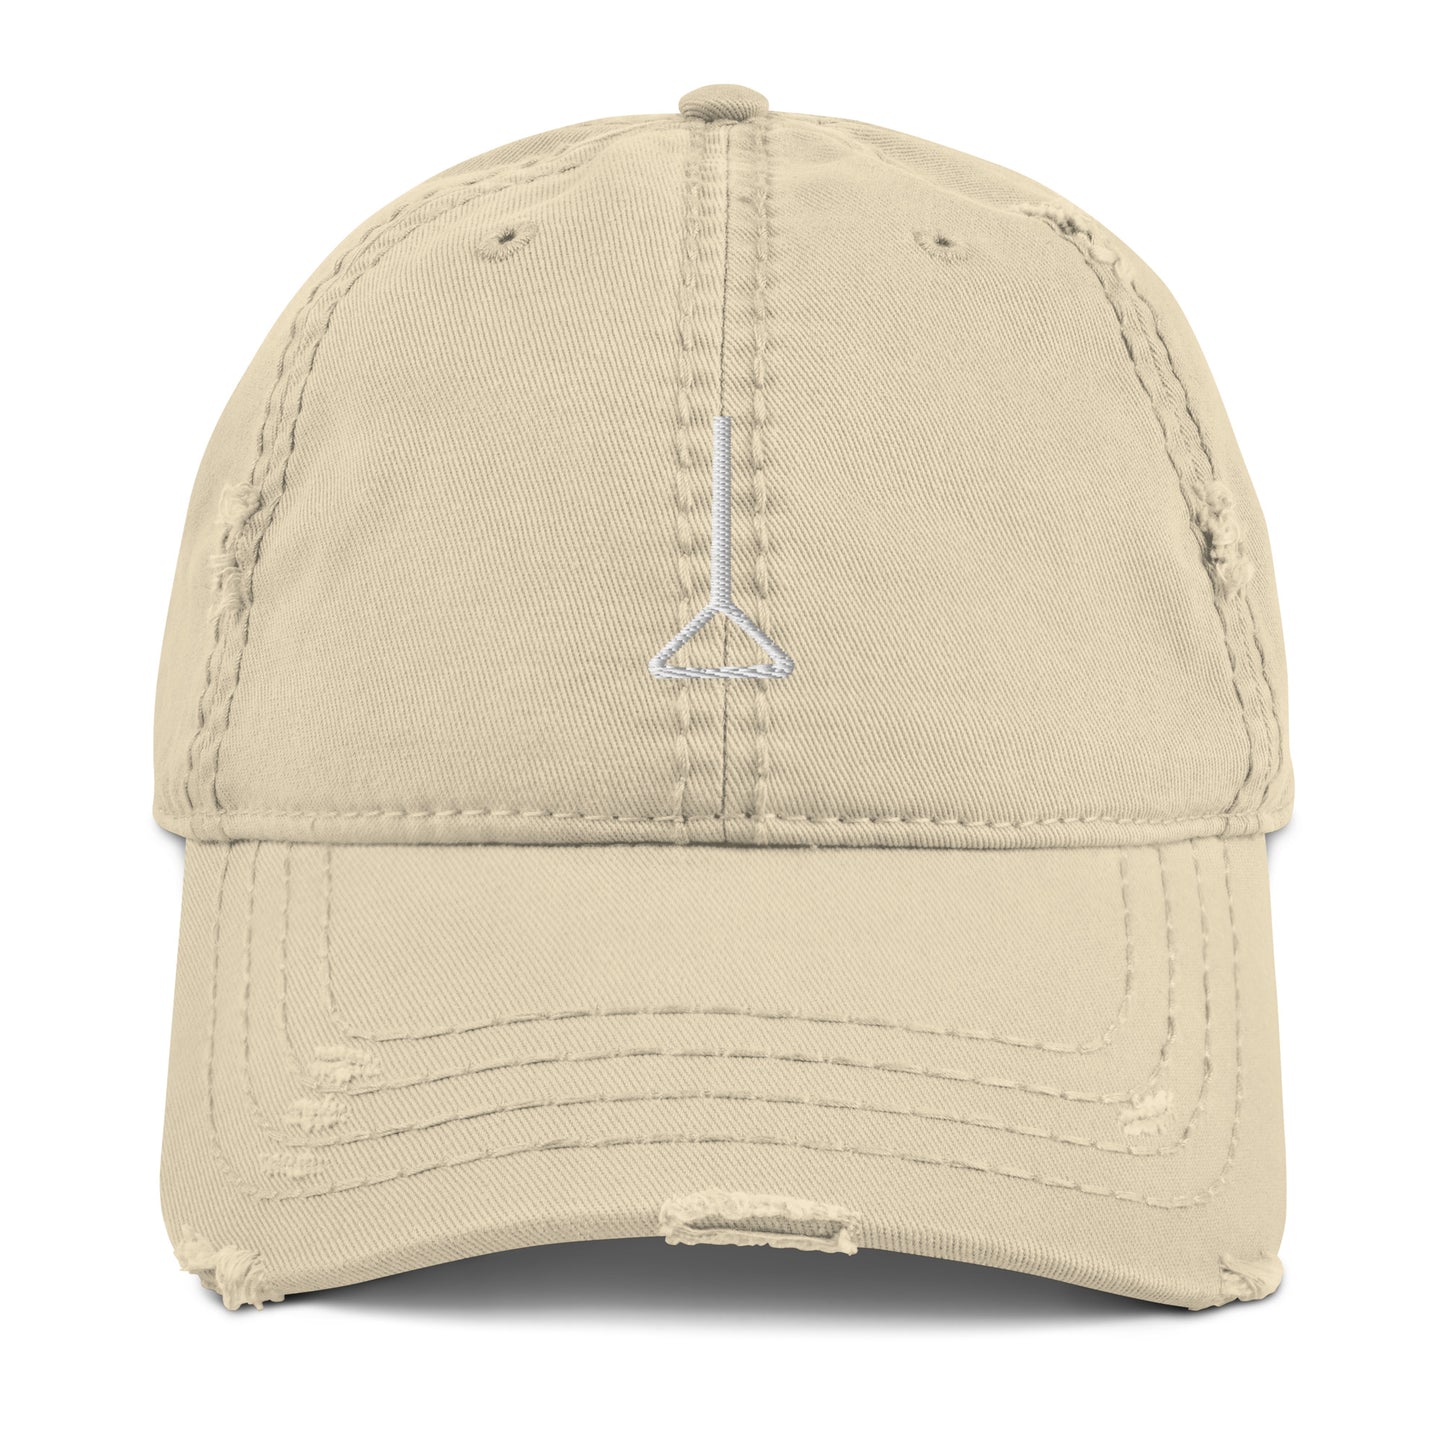 Chainsaws pull CSMs Distressed Dad Hat